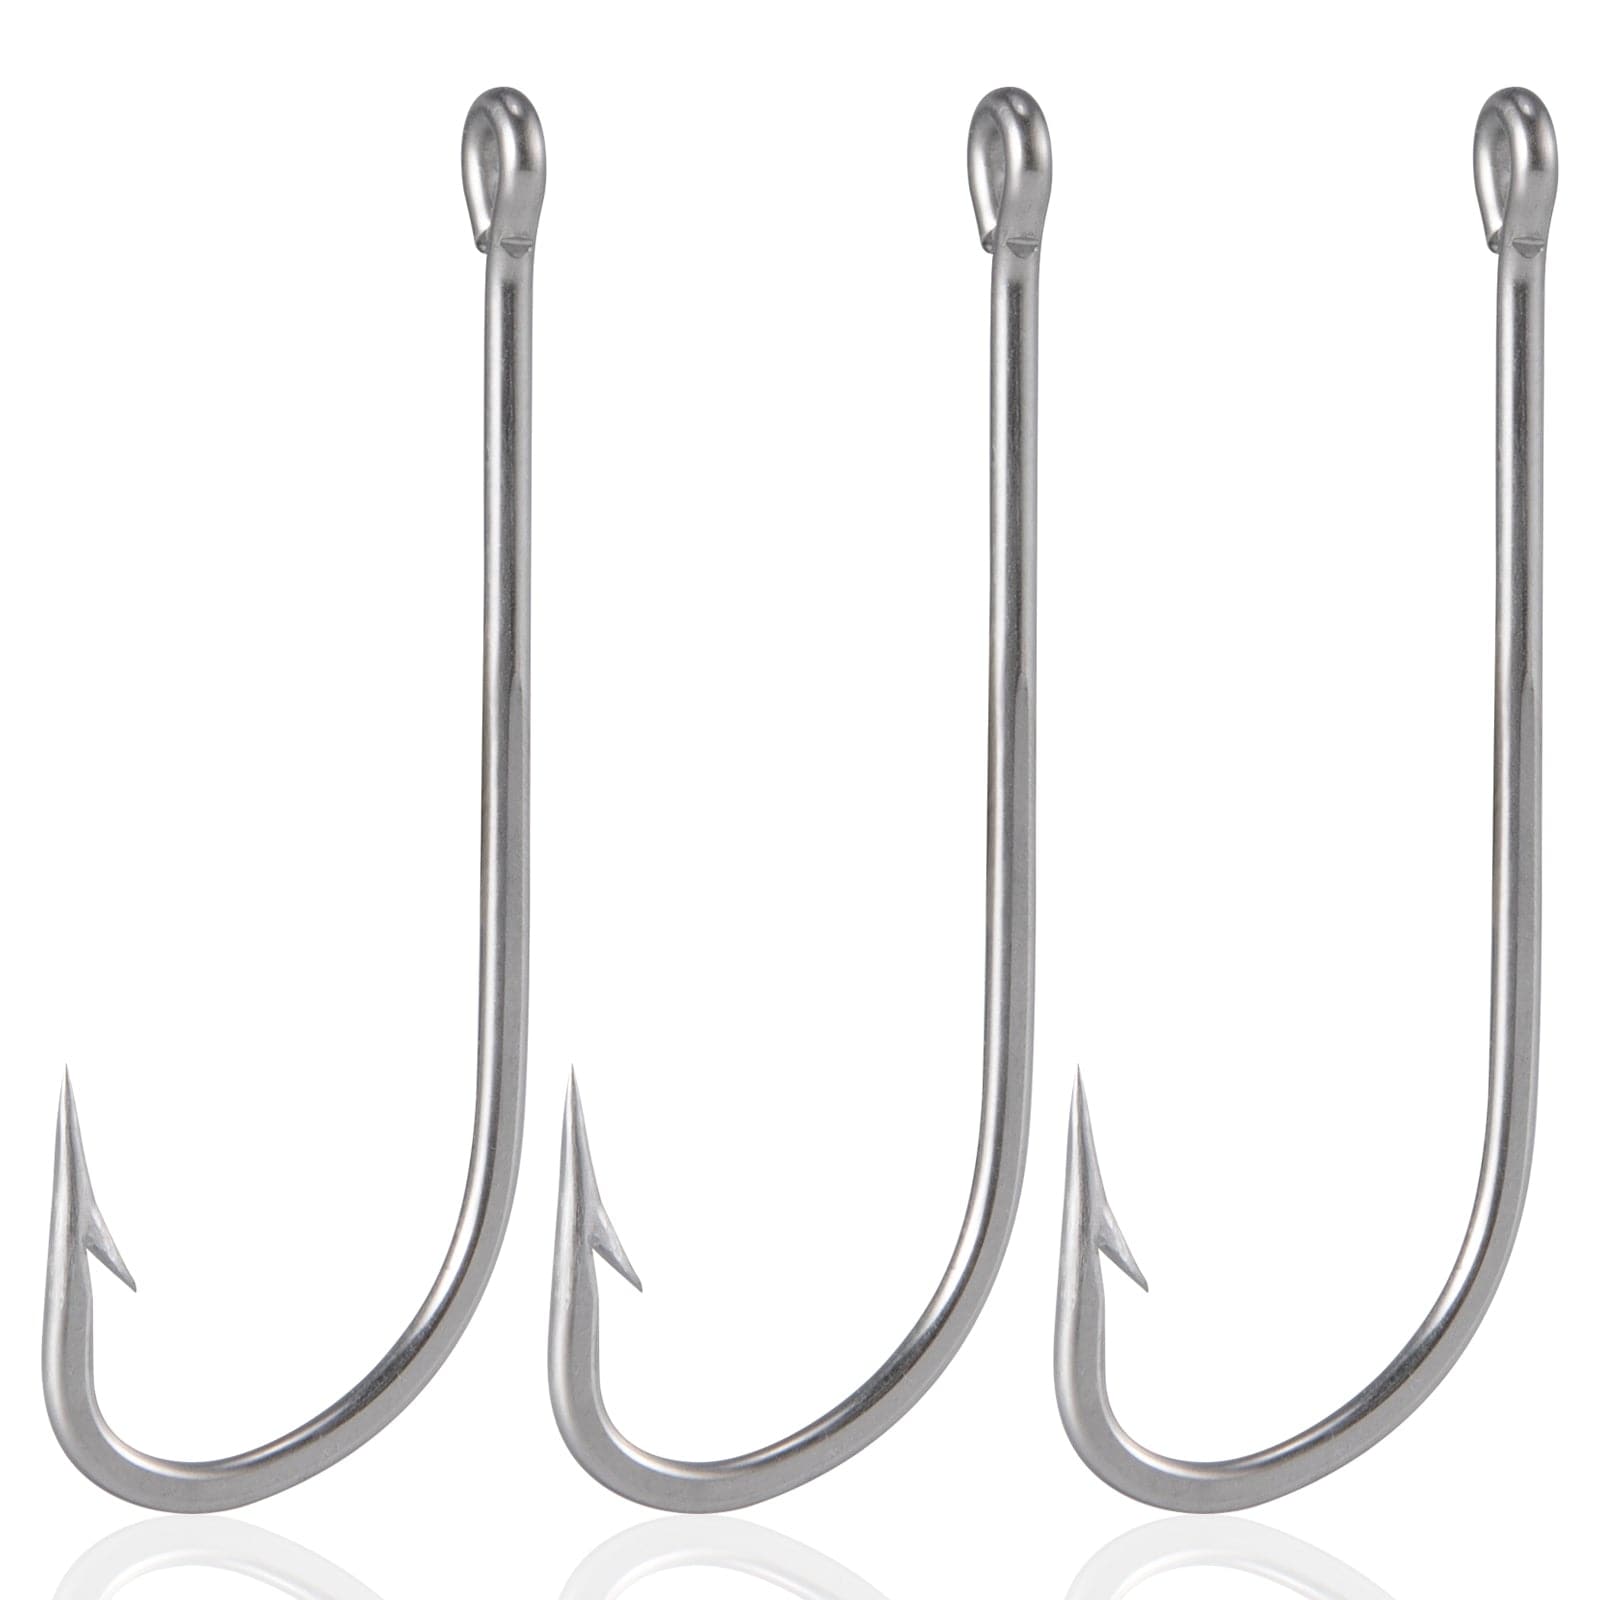 Fishing Hook - Quality O'shaughnessy Hooks Size #1/0-#10/0 - Dr